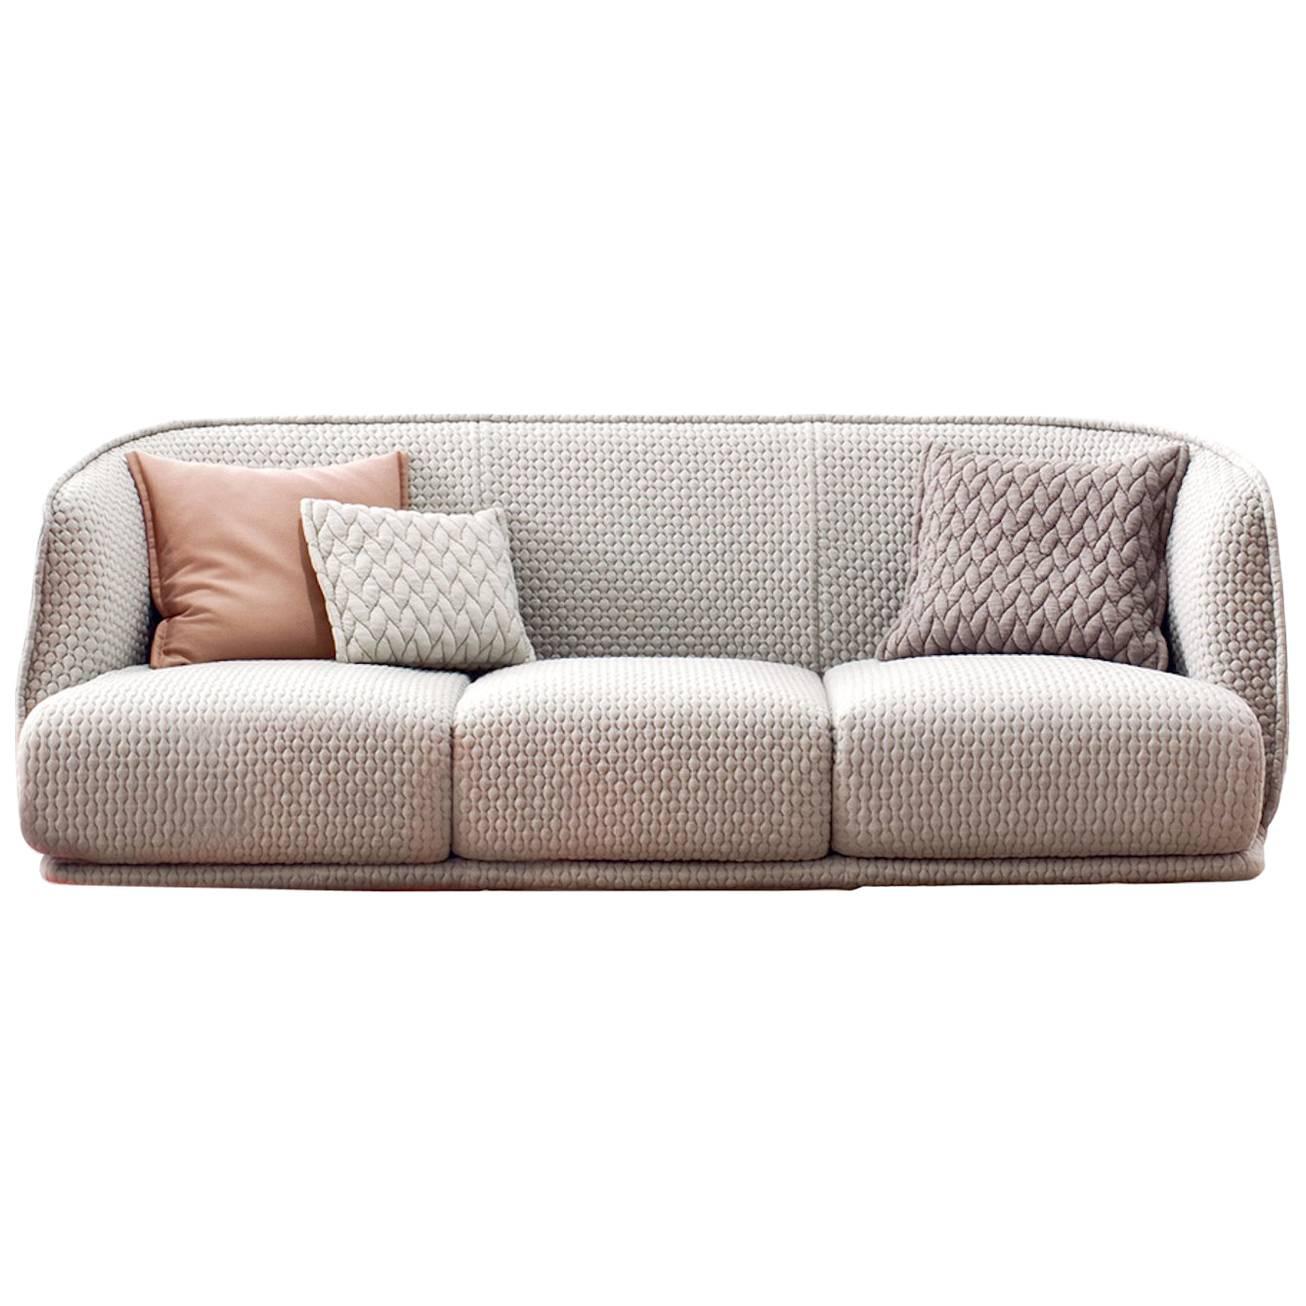 Moroso Redondo Three-Seat Sofa in Tufted Upholstery by Patricia Urquiola For Sale